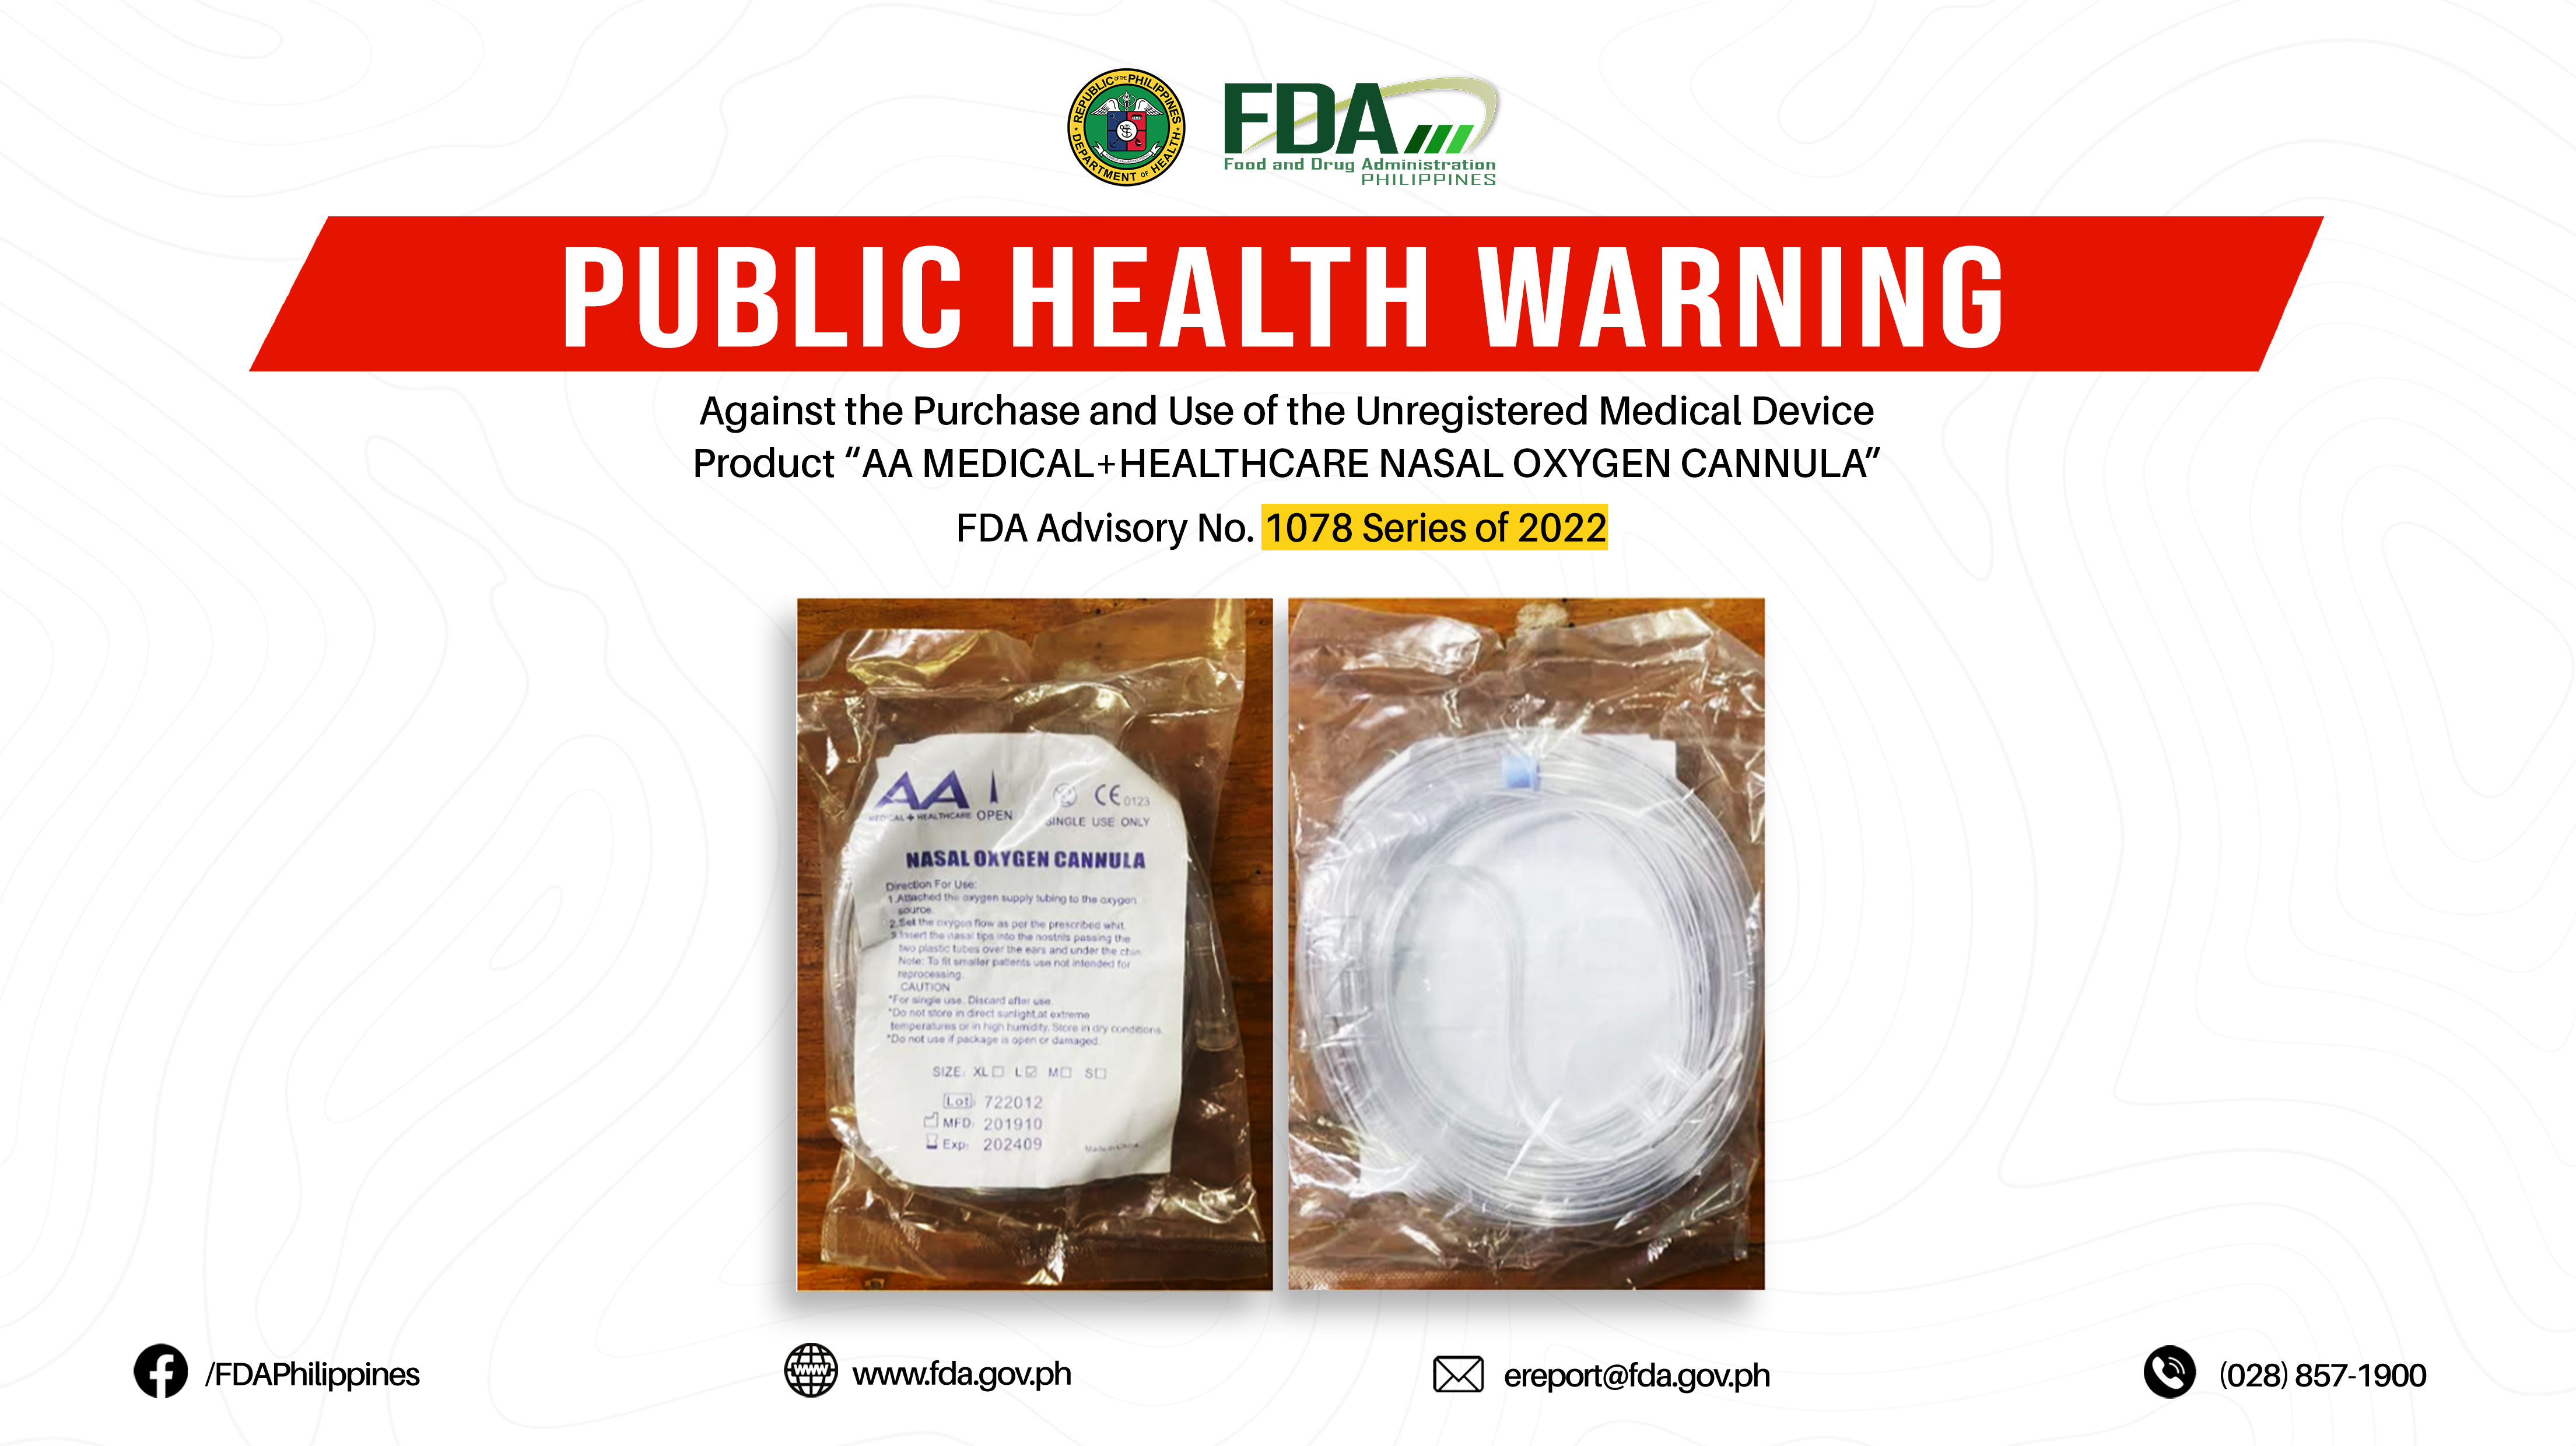 FDA Advisory No.2022-1078 || Public Health Warning Against the Purchase and Use of the Unregistered Medical Device Product “AA MEDICAL+HEALTHCARE NASAL OXYGEN CANNULA”